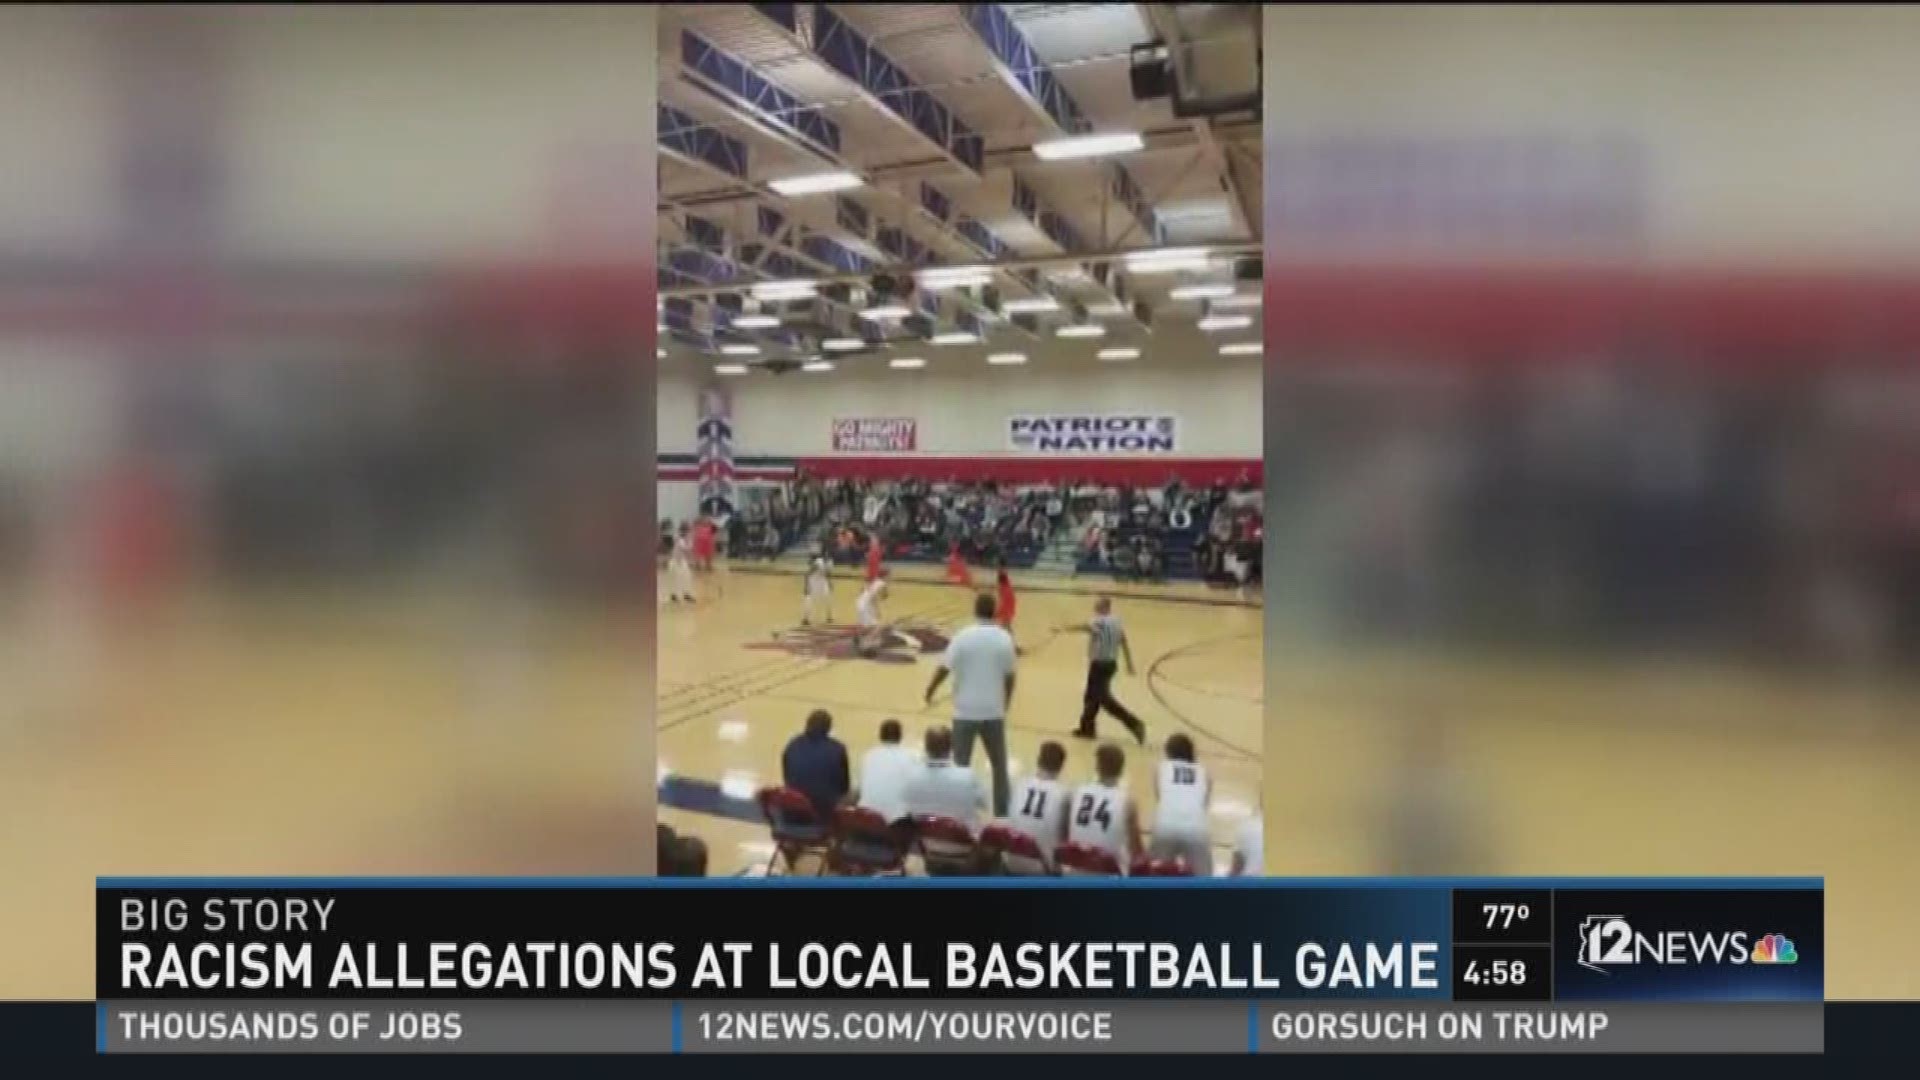 Families are calling foul after spectators were removed from the home-team side of the court.